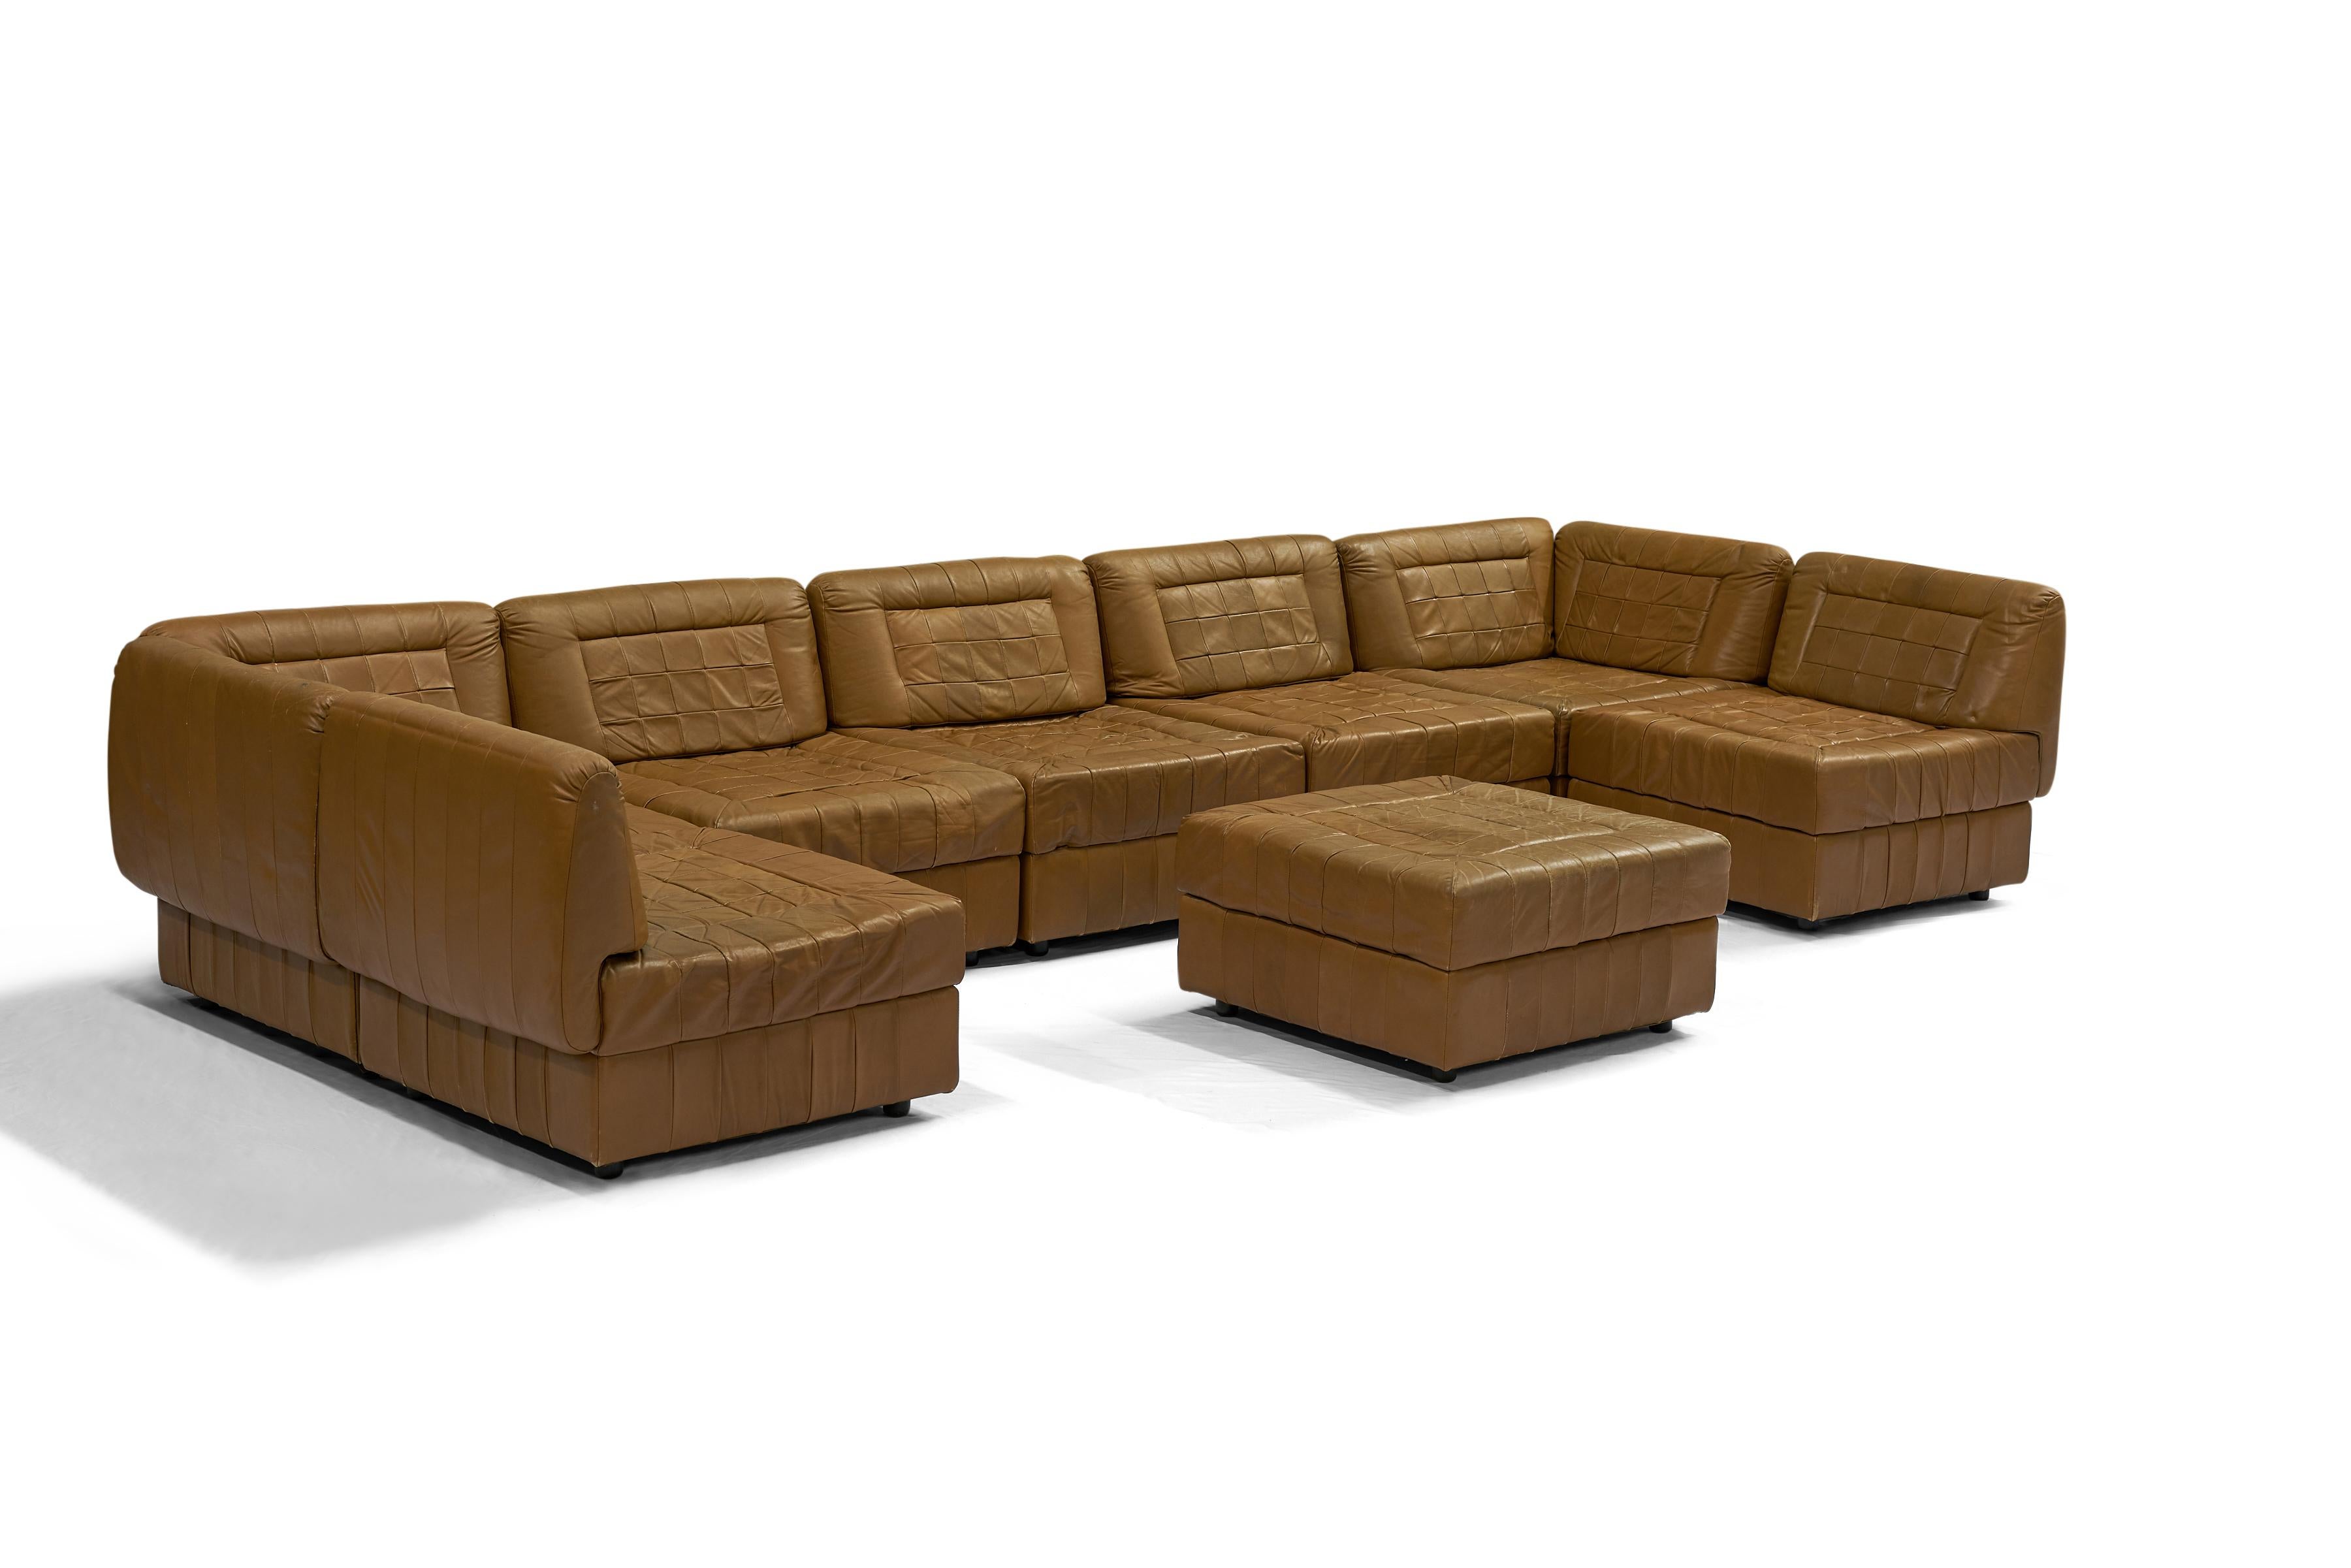 Percival Lafer leather modular seating set In Good Condition For Sale In Houston, TX